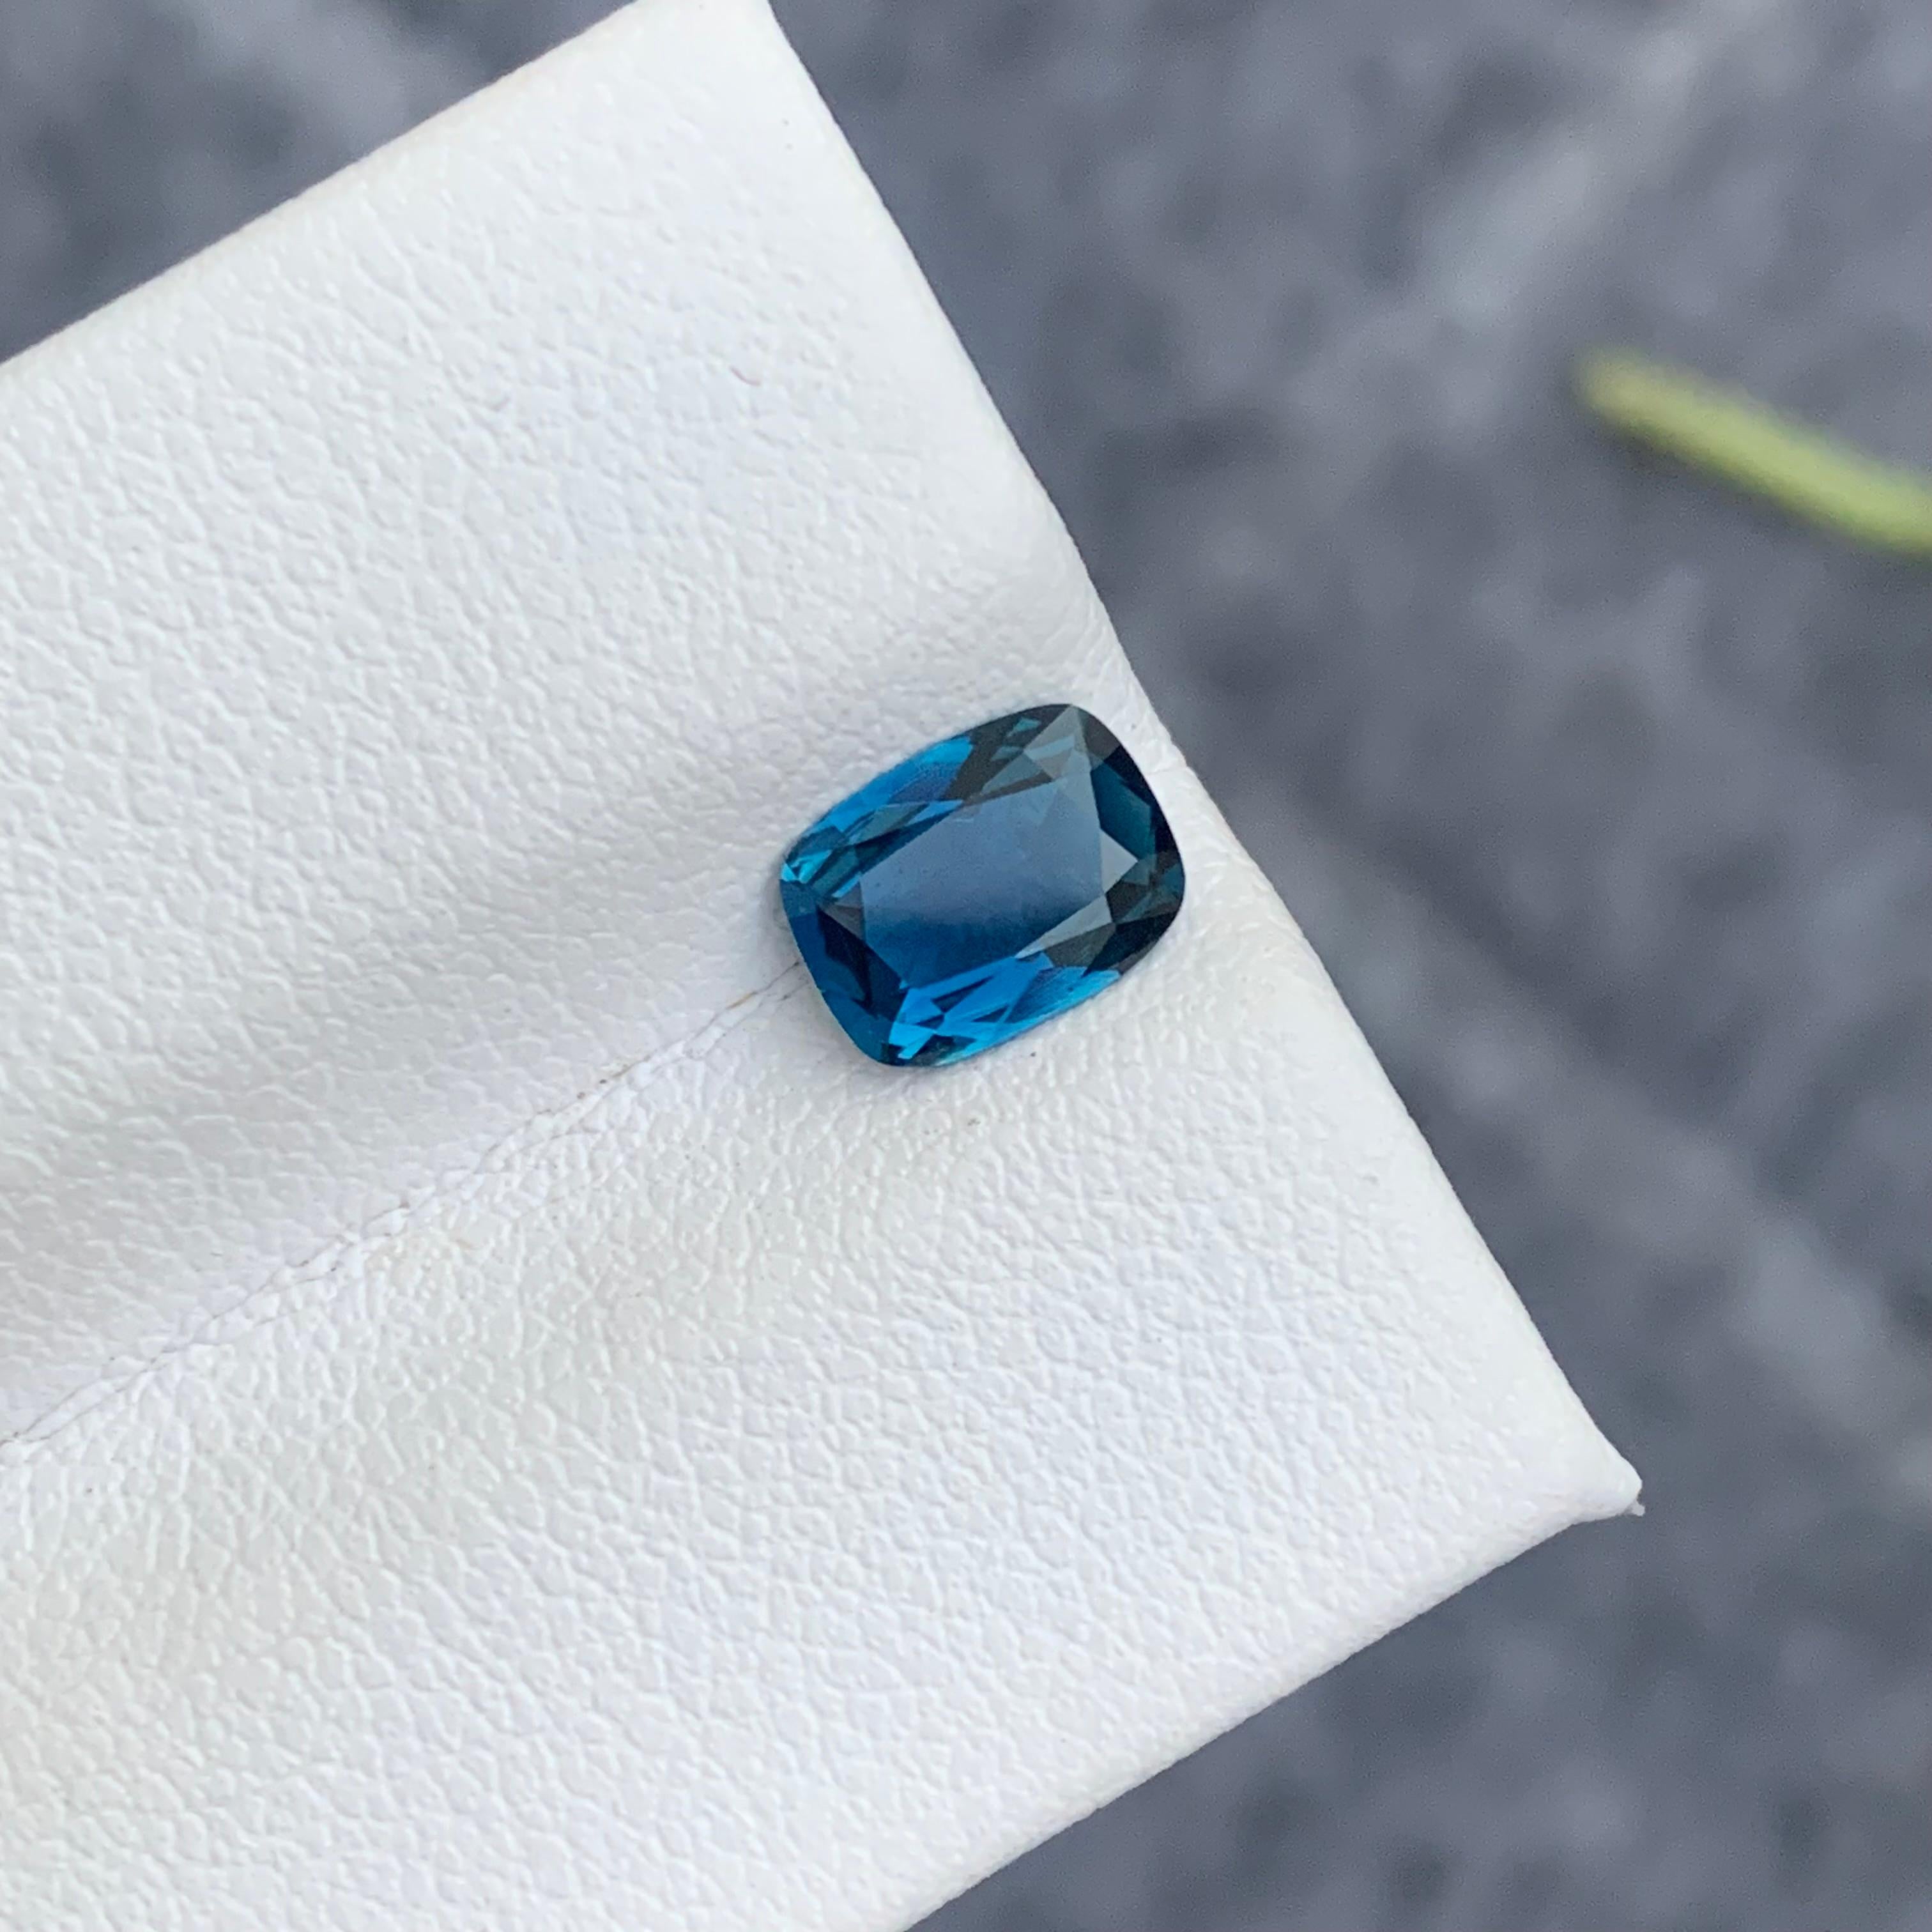 Gorgeous Loose Indicolite Tourmaline 
Weight: 1.0 Carats 
Dimension: 7.4x5.6x3 Mm
Origin; Kunar Afghanistan Mine
Color: Blue 
Shape: Long Cushion
Treatment: Non
Certificate: On Demand 
Indicolite tourmalines (tourmalines with blue in them) are rare.